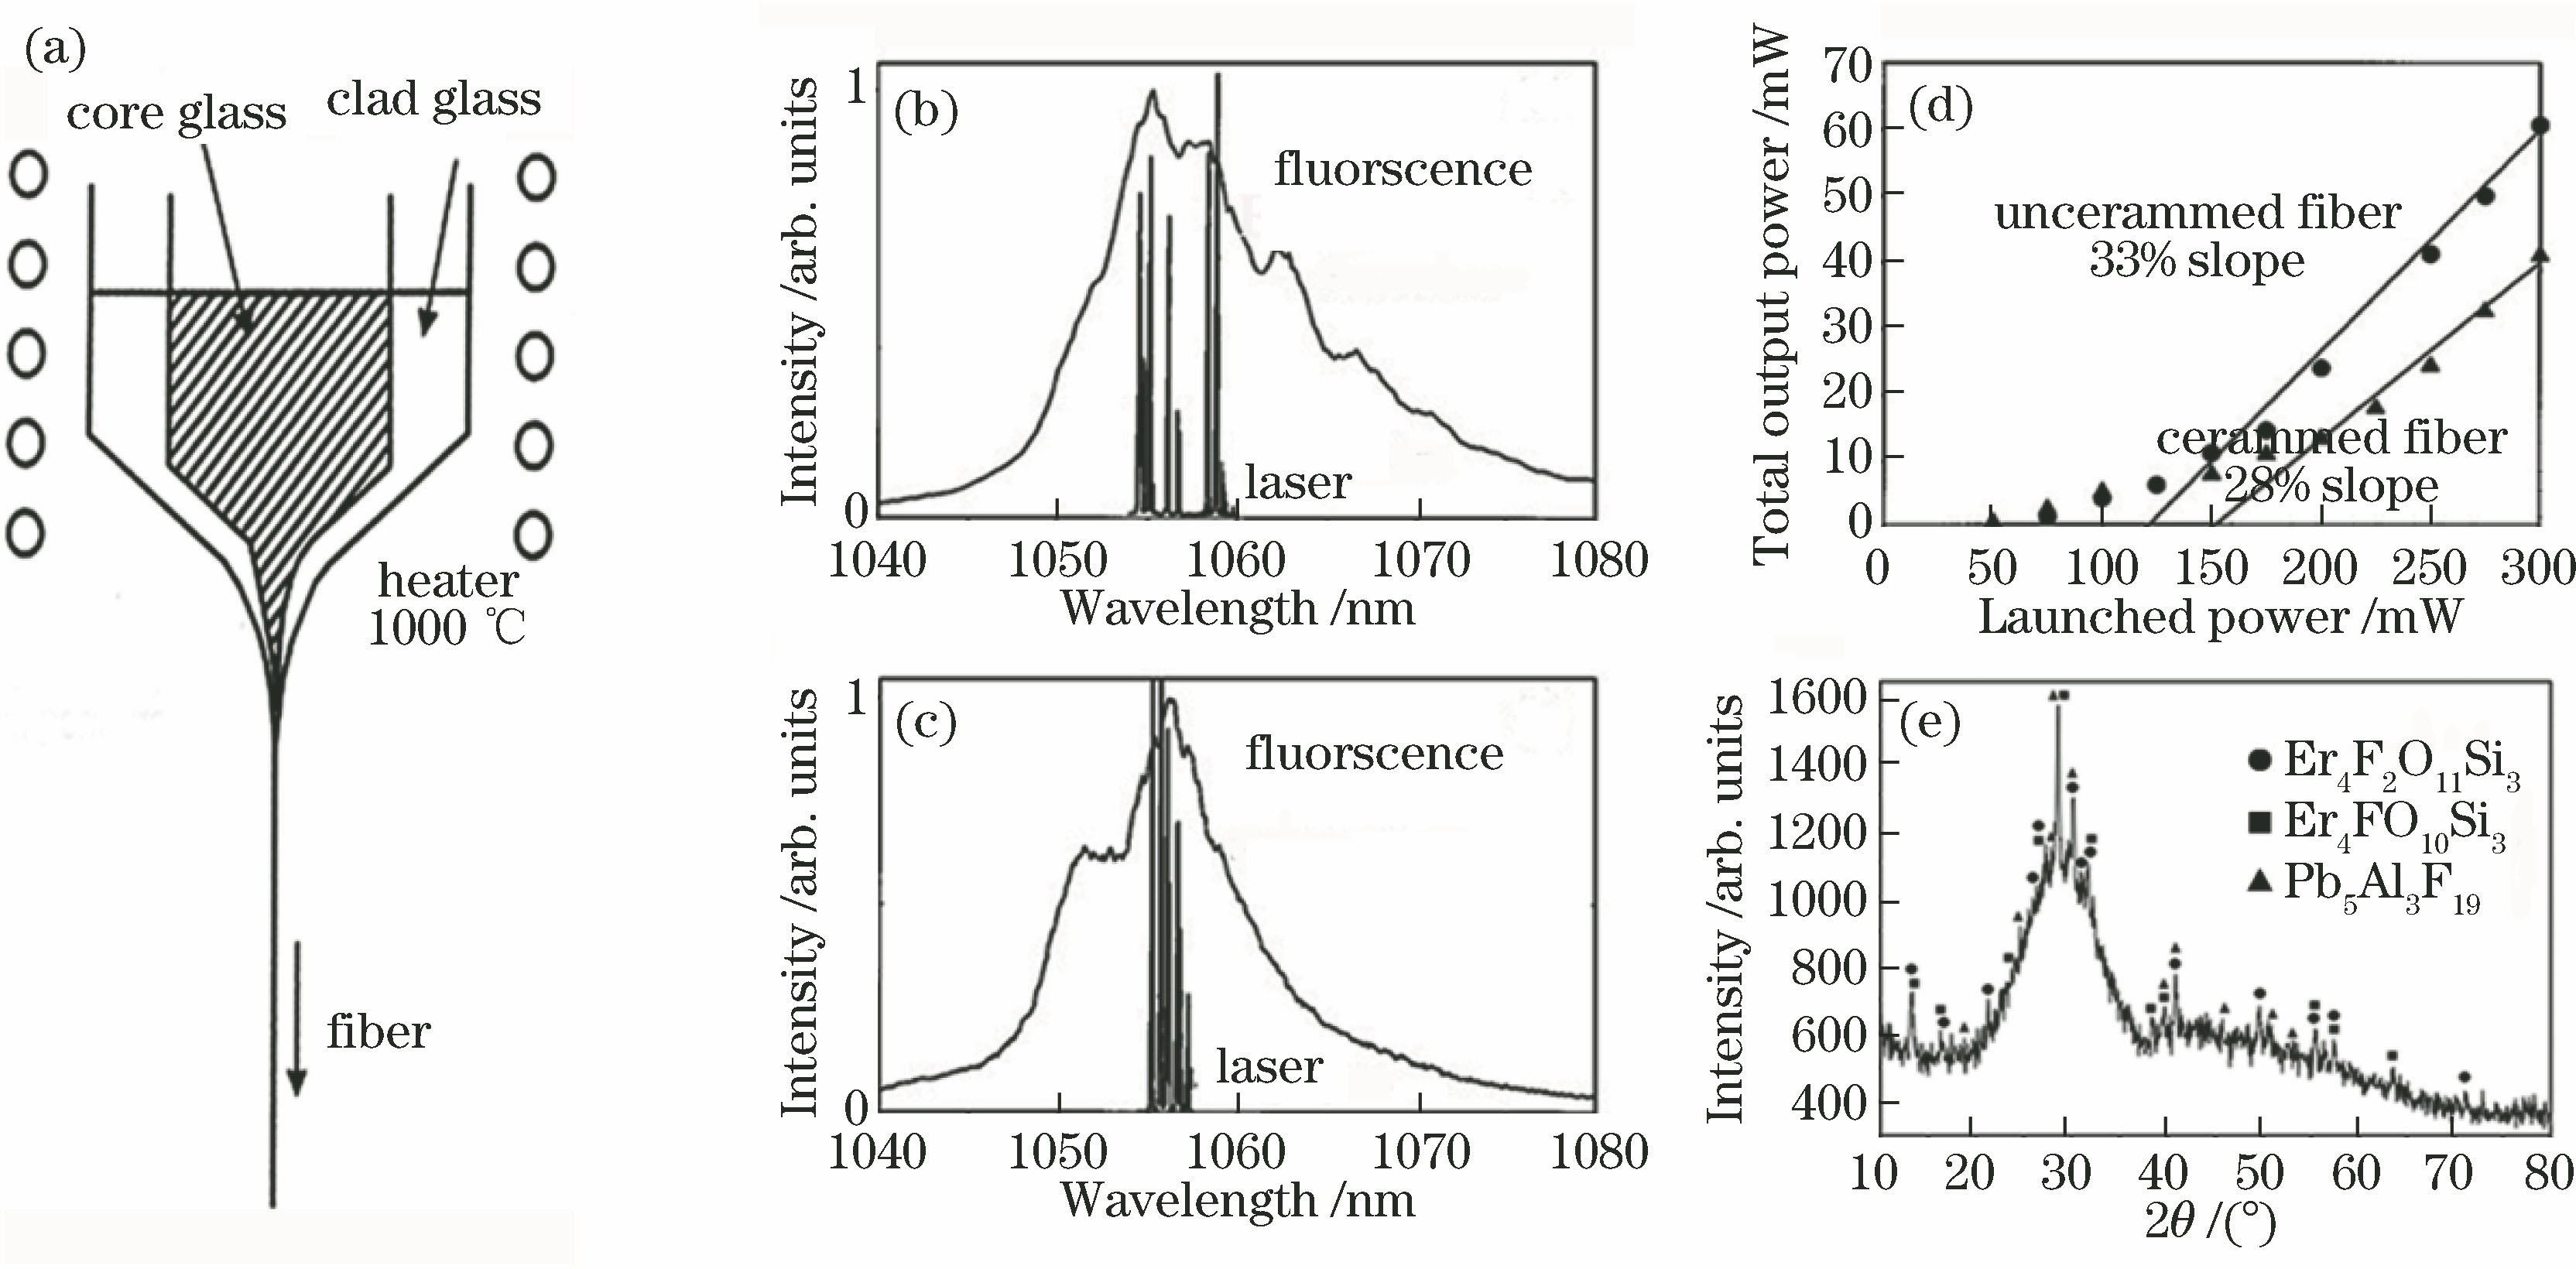 Rare earth ion doped glass ceramic fibers fabricated by double-crucible method[14,16]. (a) Schematic of double-crucible method; (b) (c) emission spectra of fiber and glass ceramic fiber fabricated by double-crucible method; (d) laser slope curves of fiber and glass ceramic fiber; (e) X-ray diffraction (XRD) pattern of glass ceramic fiber